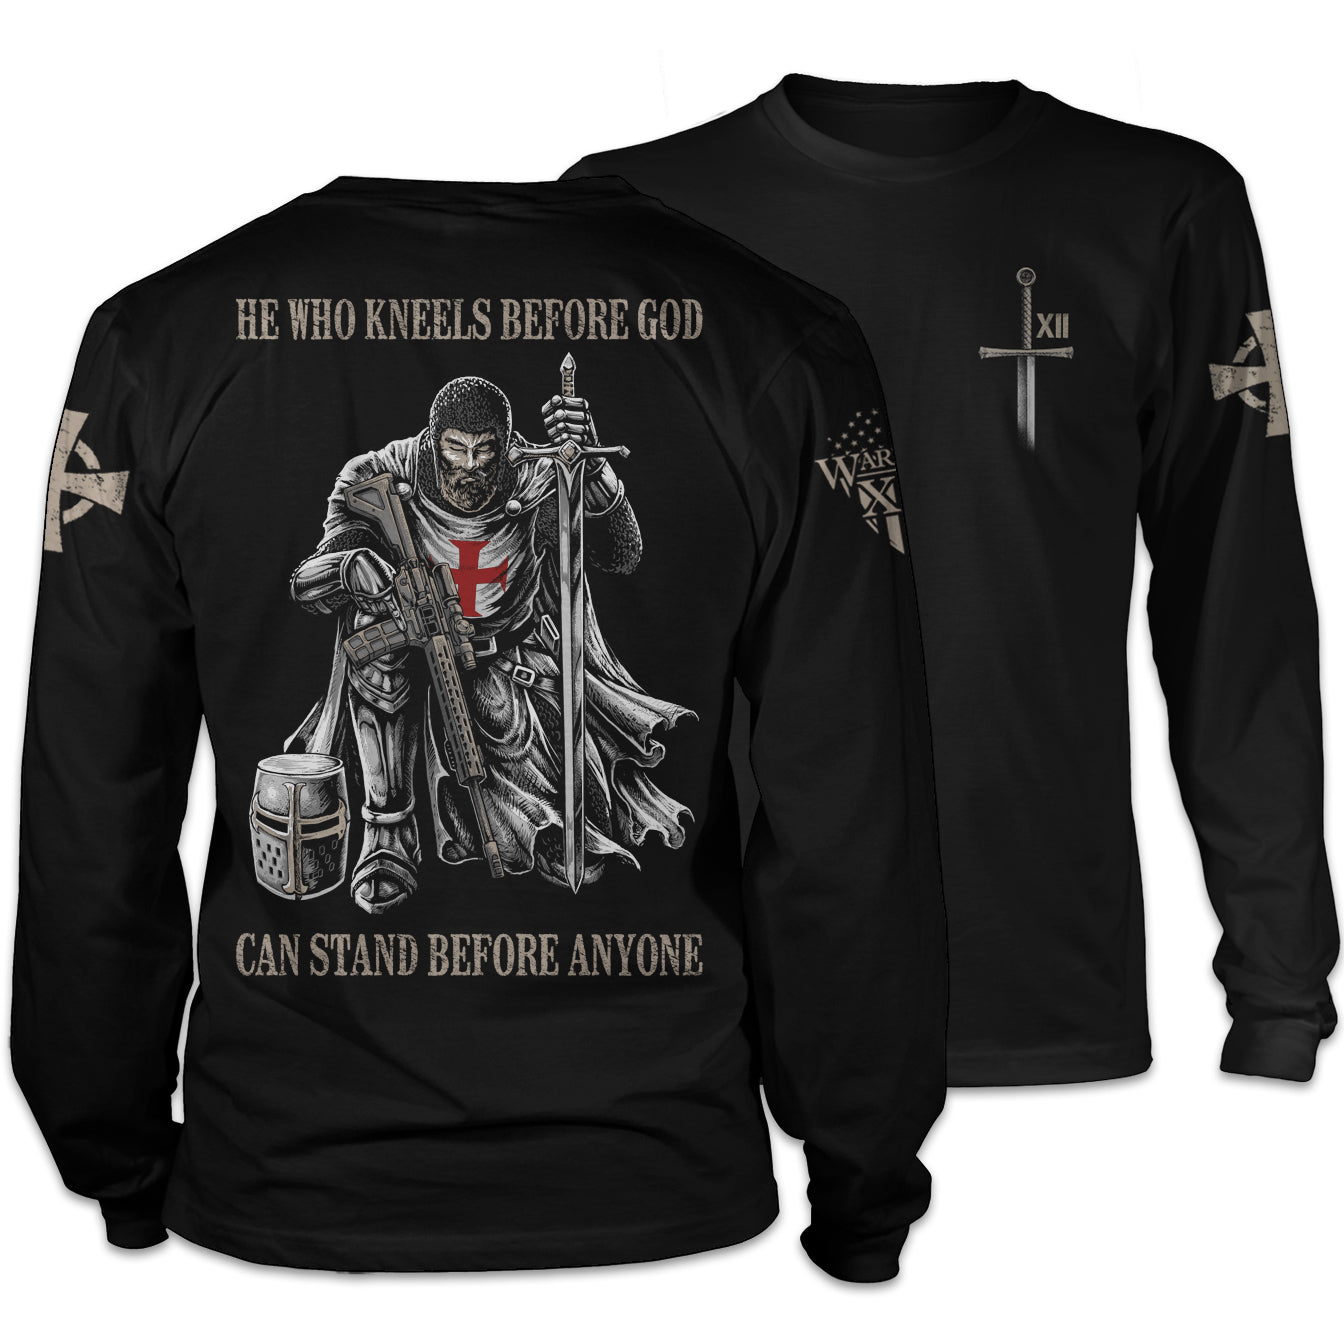 Front & back black long sleeve shirt with the words "He who kneels before God can stand before anyone" with a knights templar kneeling holding a sword printed on the shirt.